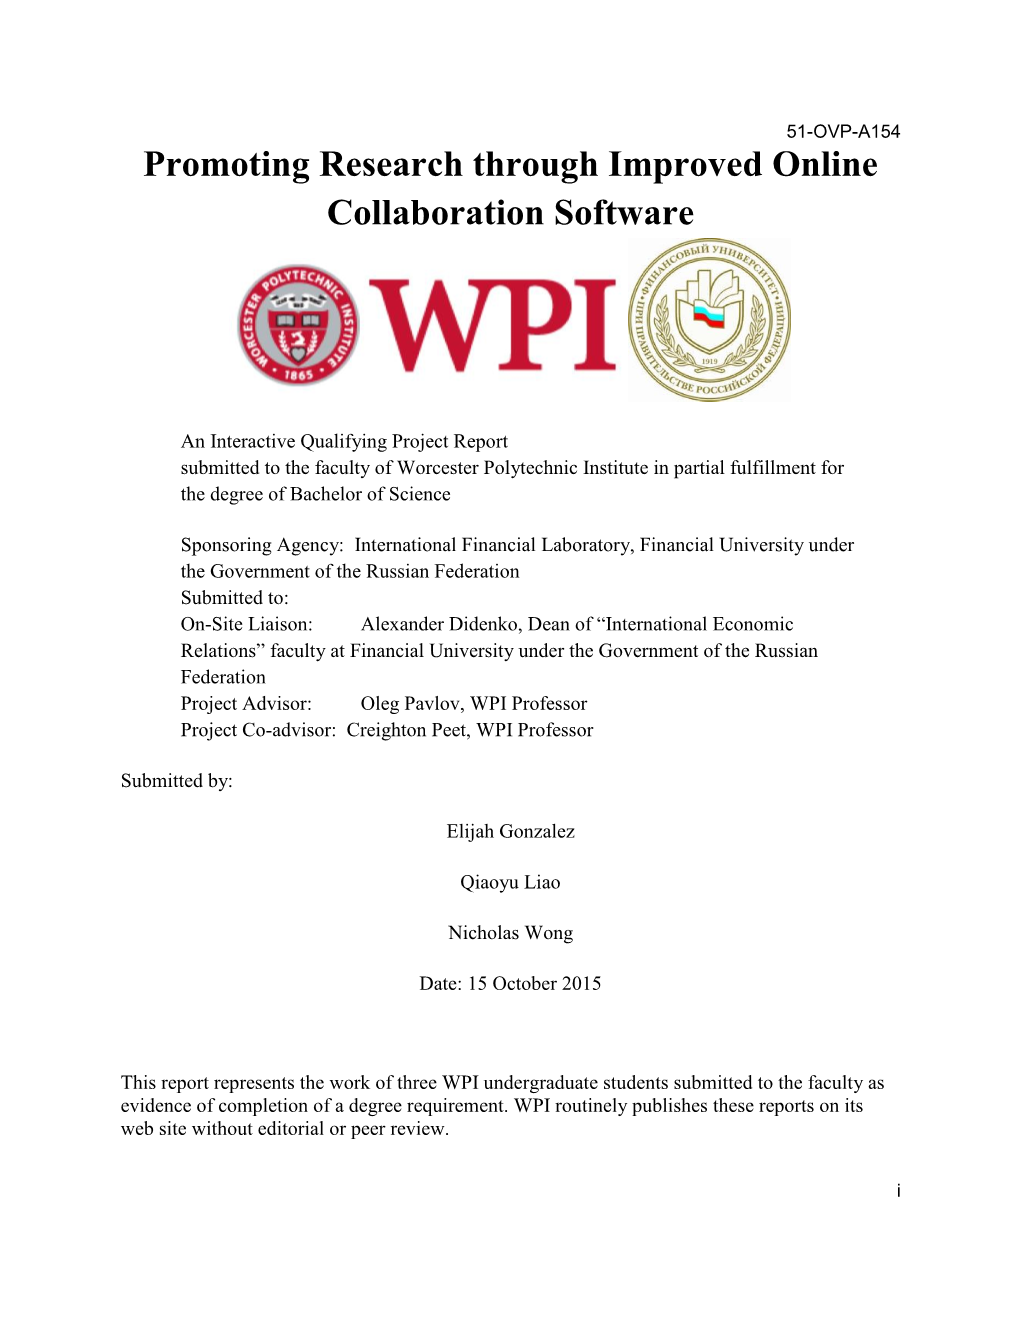 Promoting Research Through Improved Online Collaboration Software